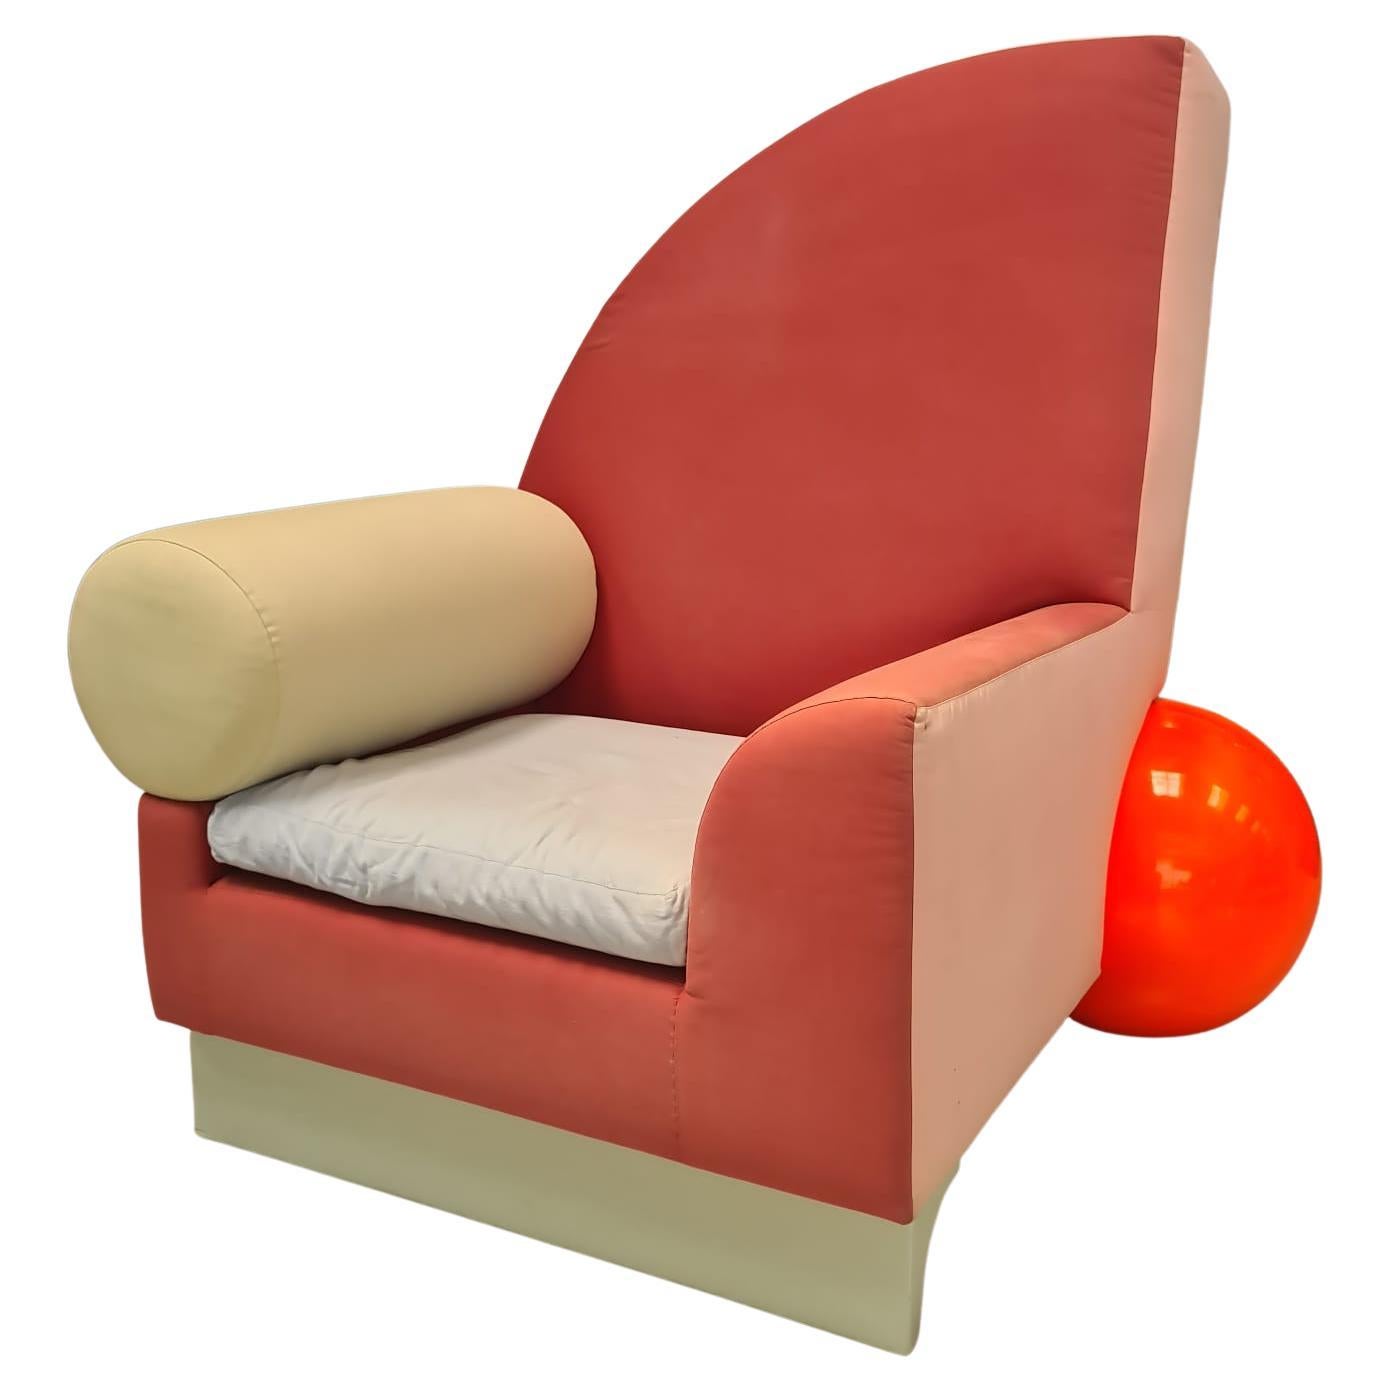 Bel Air Armchair by Peter Shire, Memphis Milano For Sale